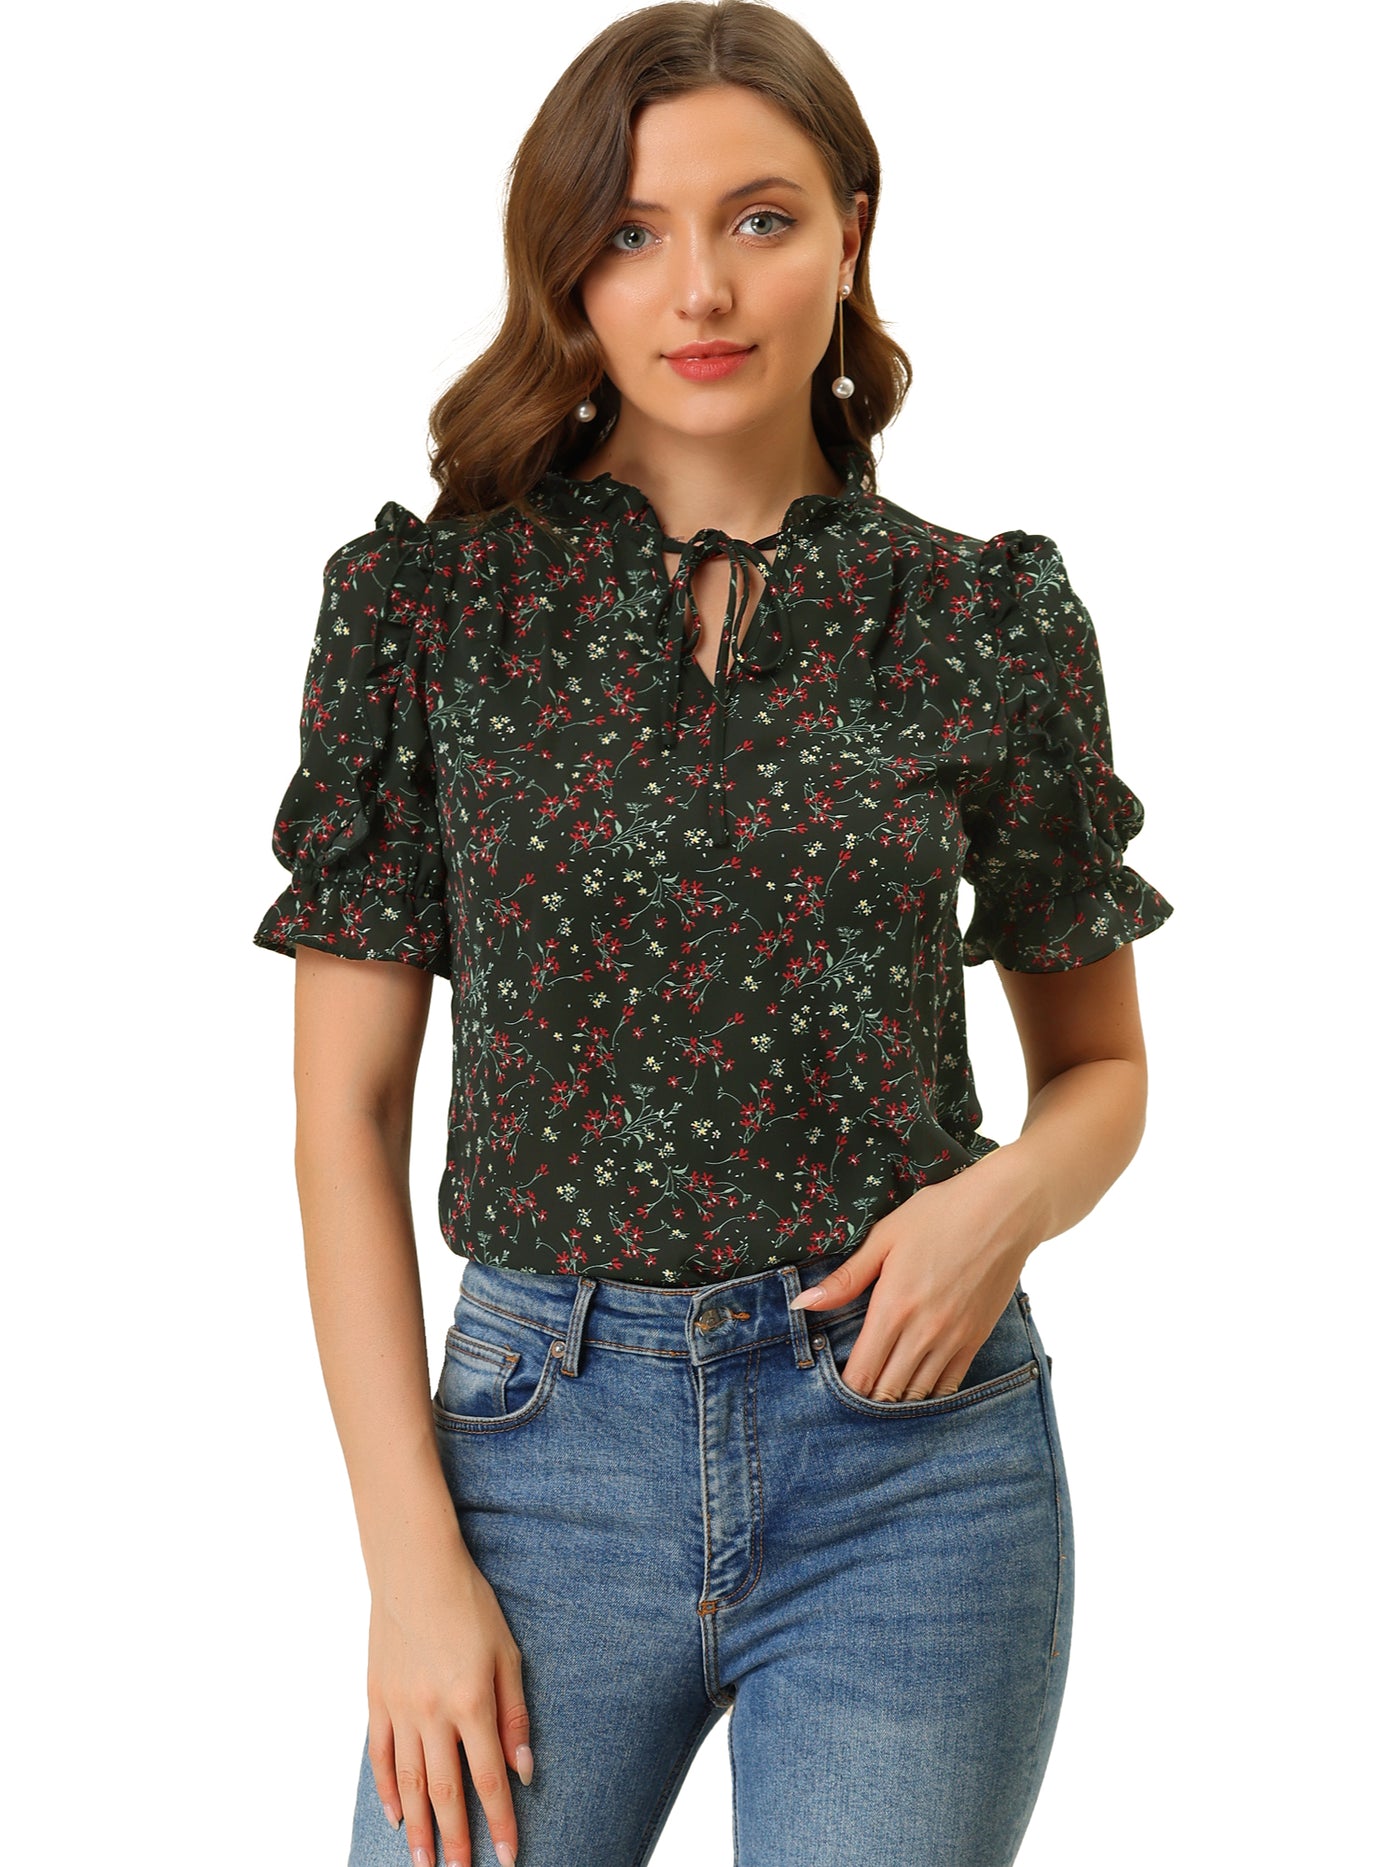 Allegra K Ruffle Tie Neck Puff Short Sleeve Casual Floral Blouse Top